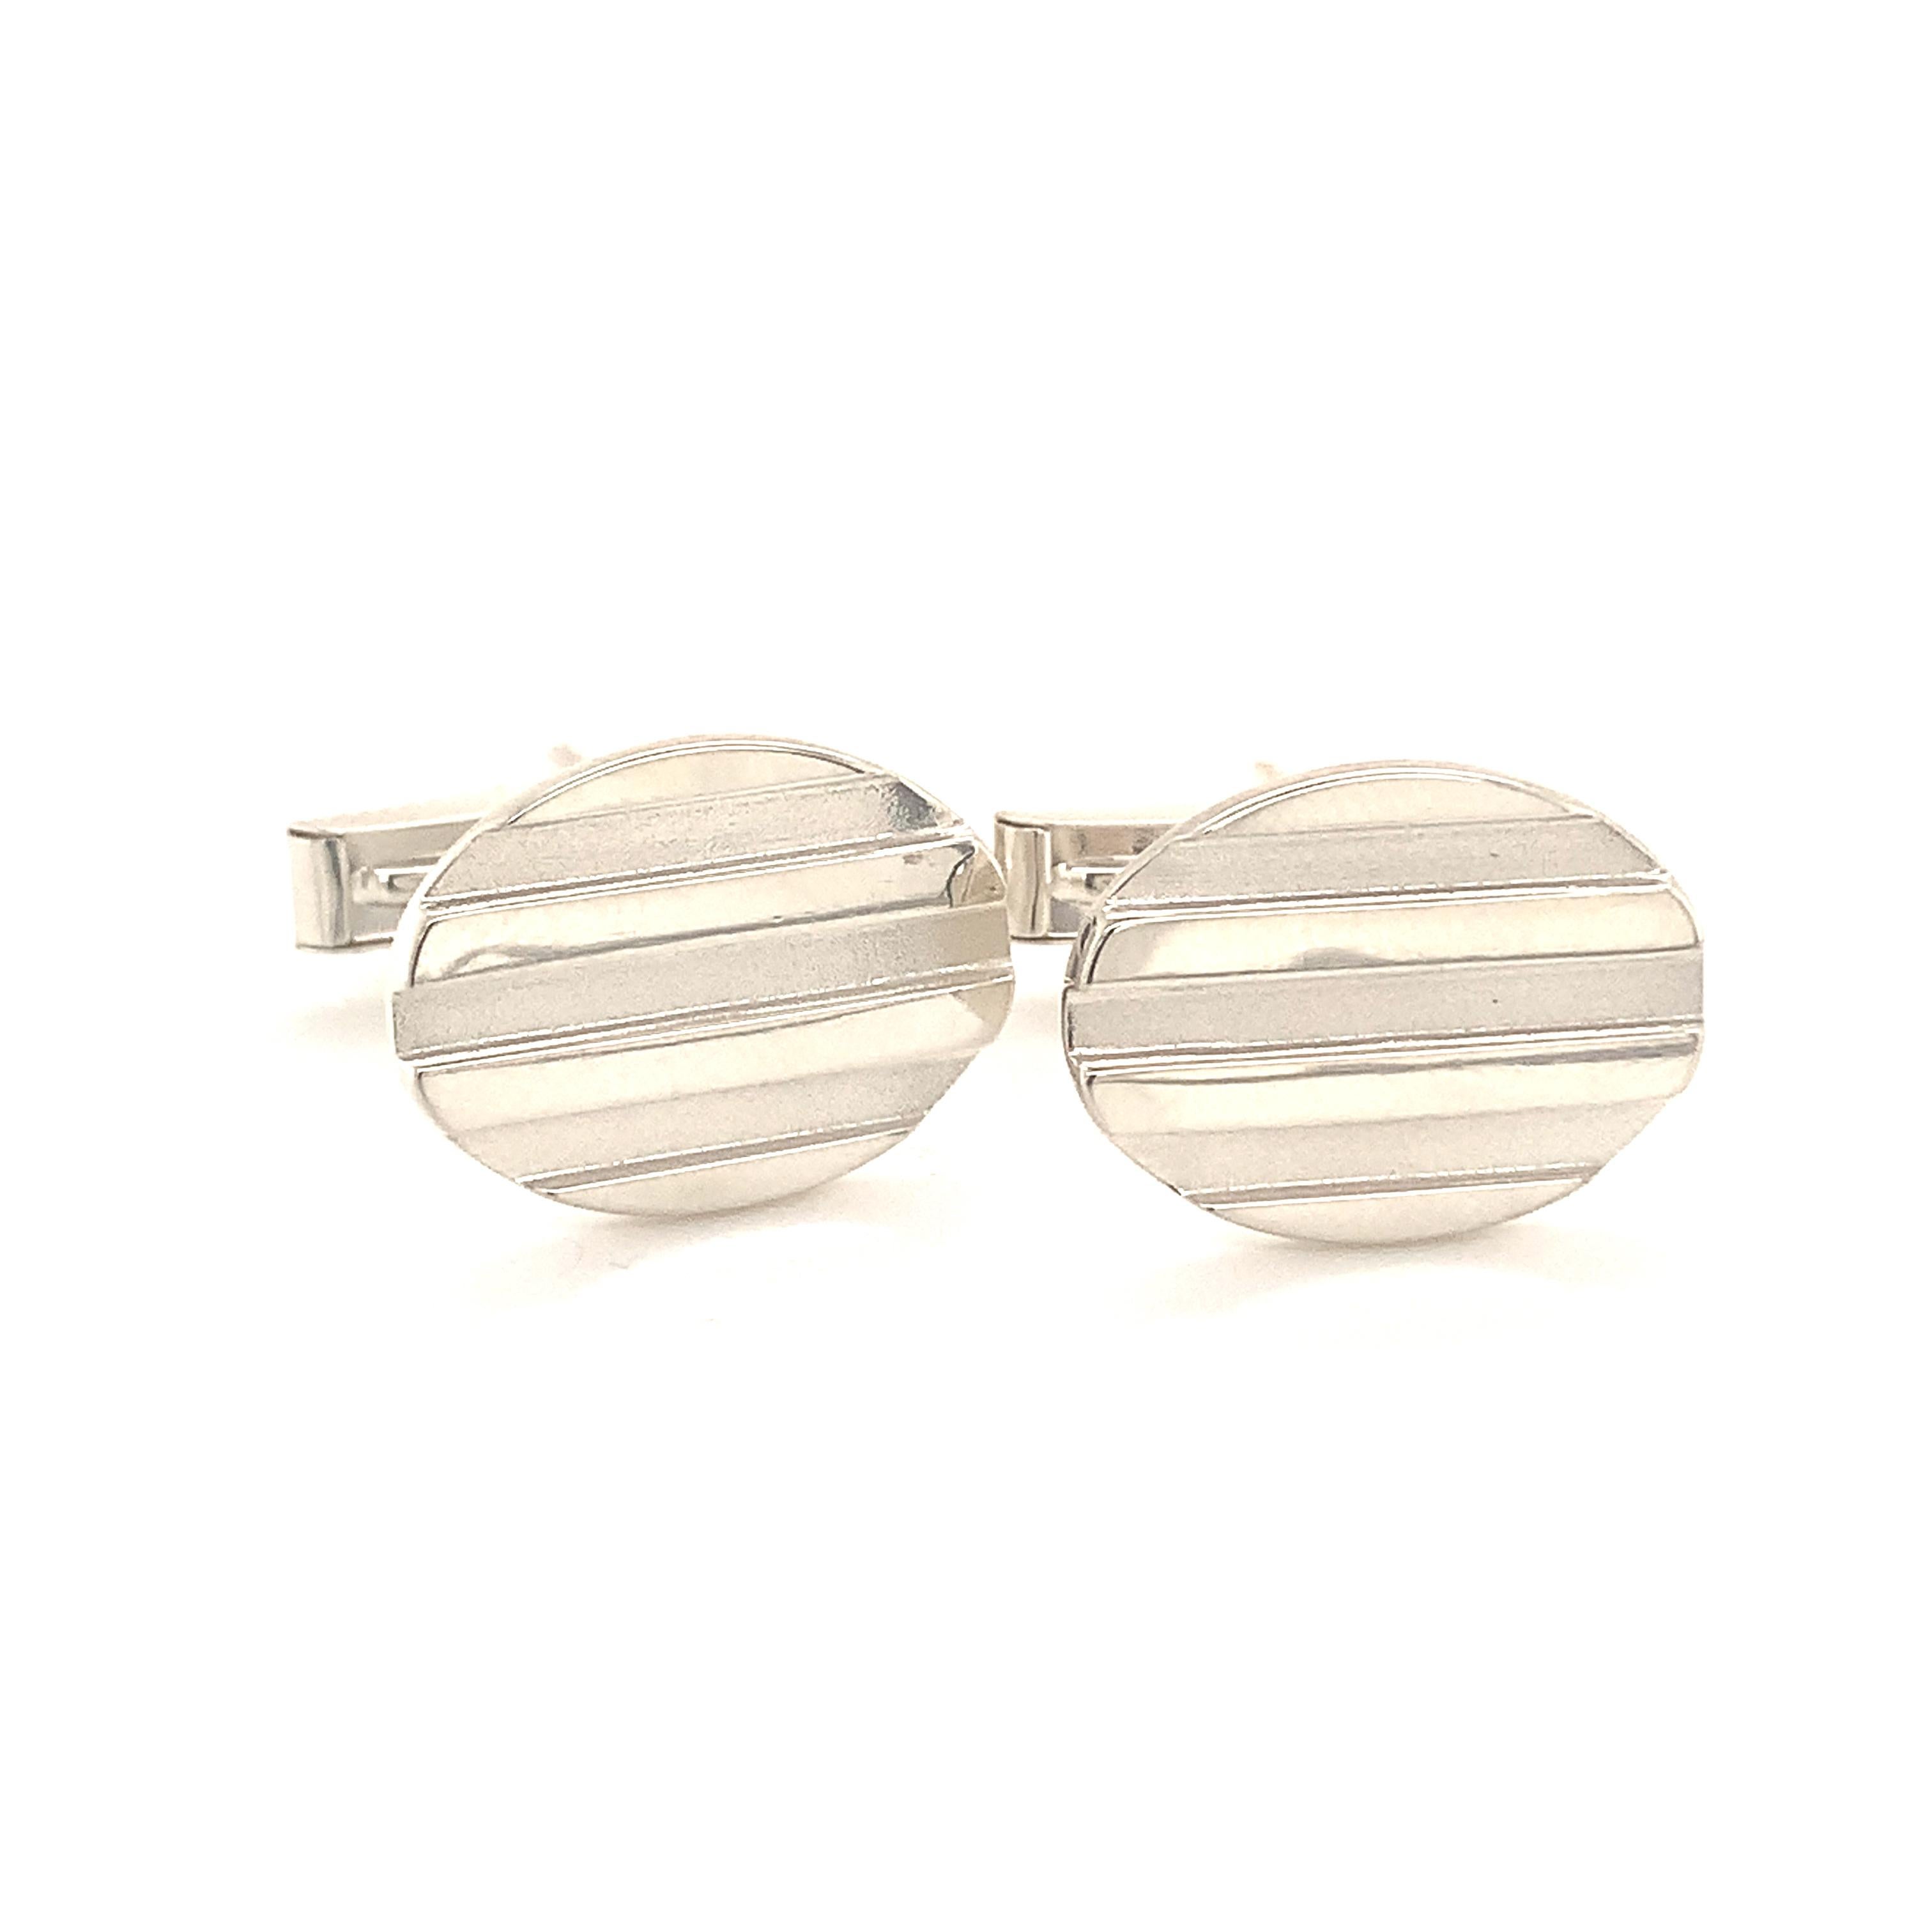 Tiffany & Co. Cufflinks Sterling Silver 925 10.8 Grams TIF26

With a weight of 10.8 grams

100% authentic guaranteed

Newly polished and looks like-new condition

We have taken many pictures at different angles for you to see how fabulous the